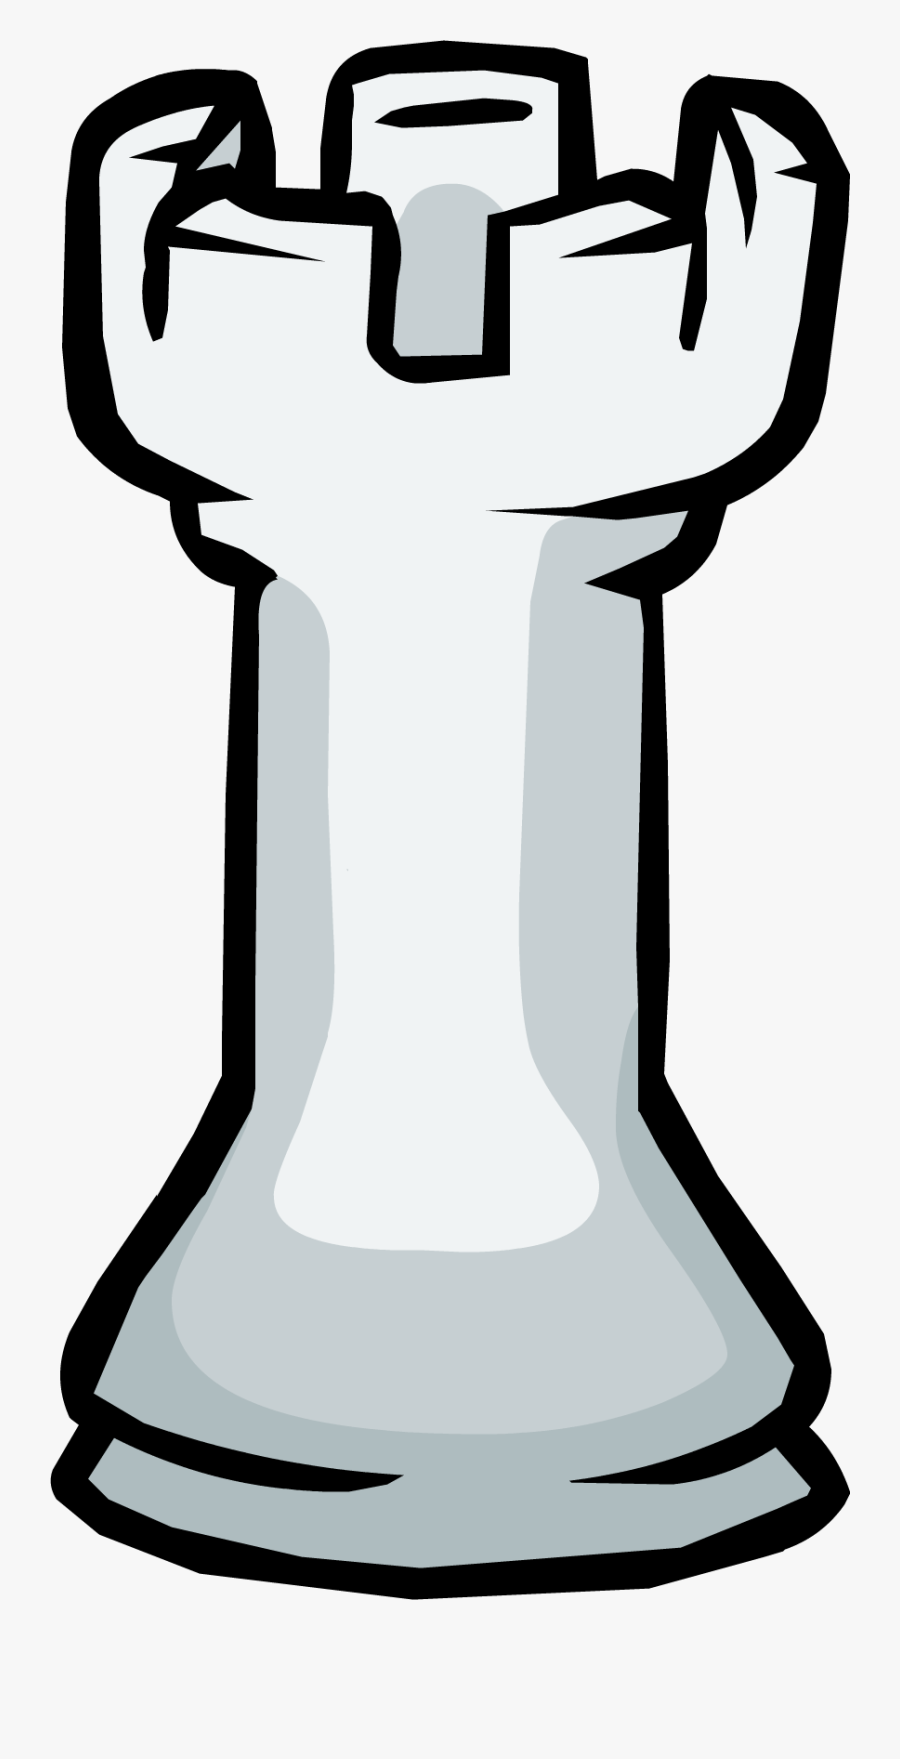 Club Penguin Rewritten Wiki - White Castle Chess Png, Transparent Clipart